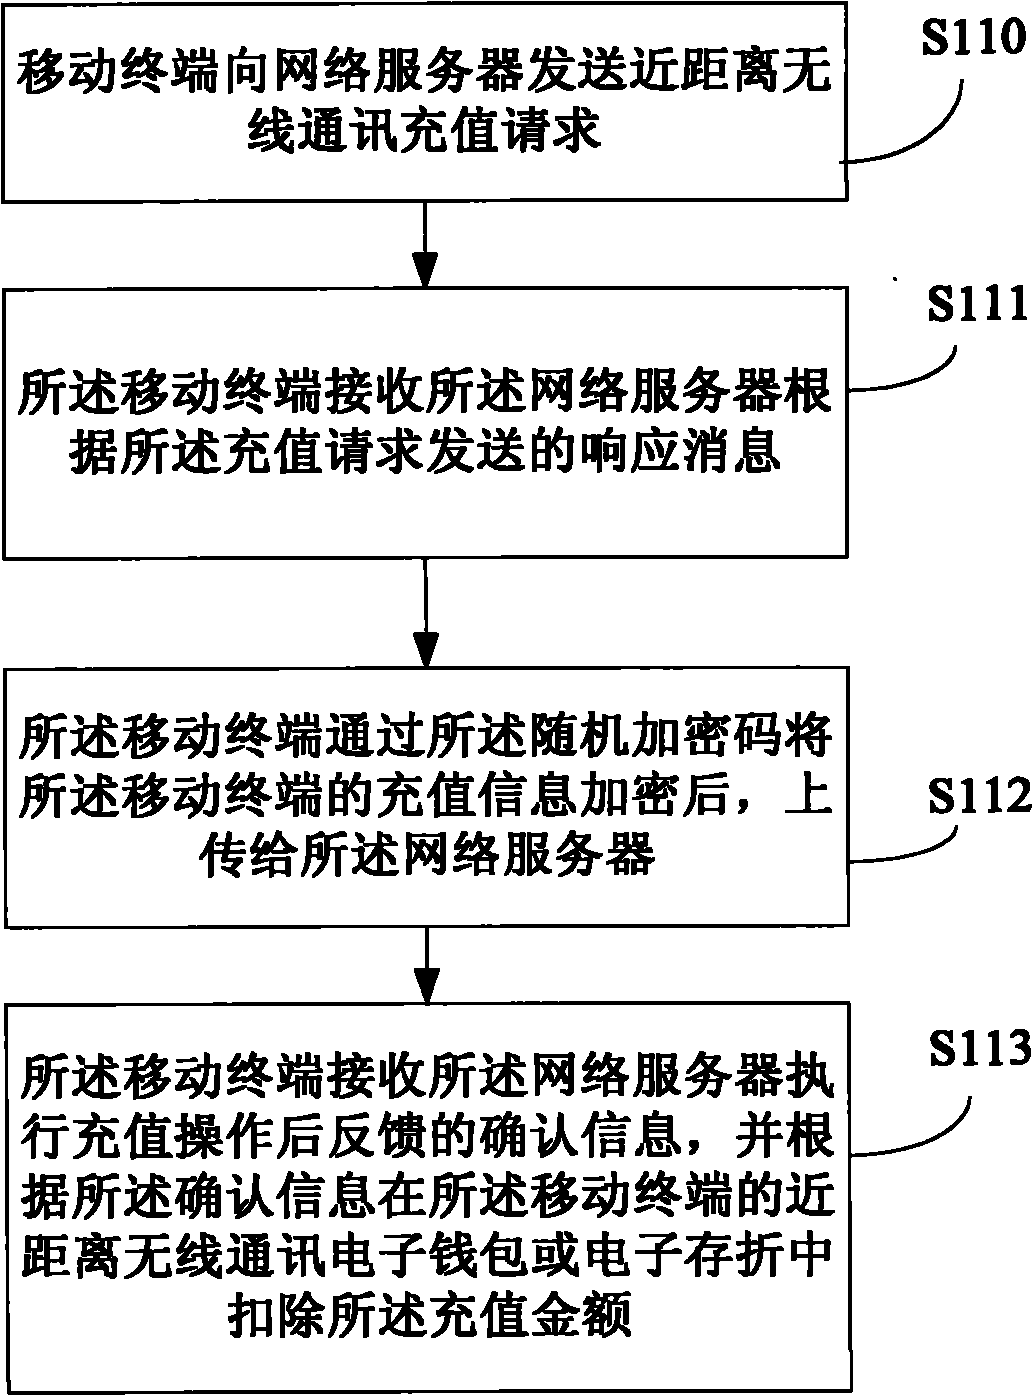 Method for recharging mobile terminal, mobile terminal and server